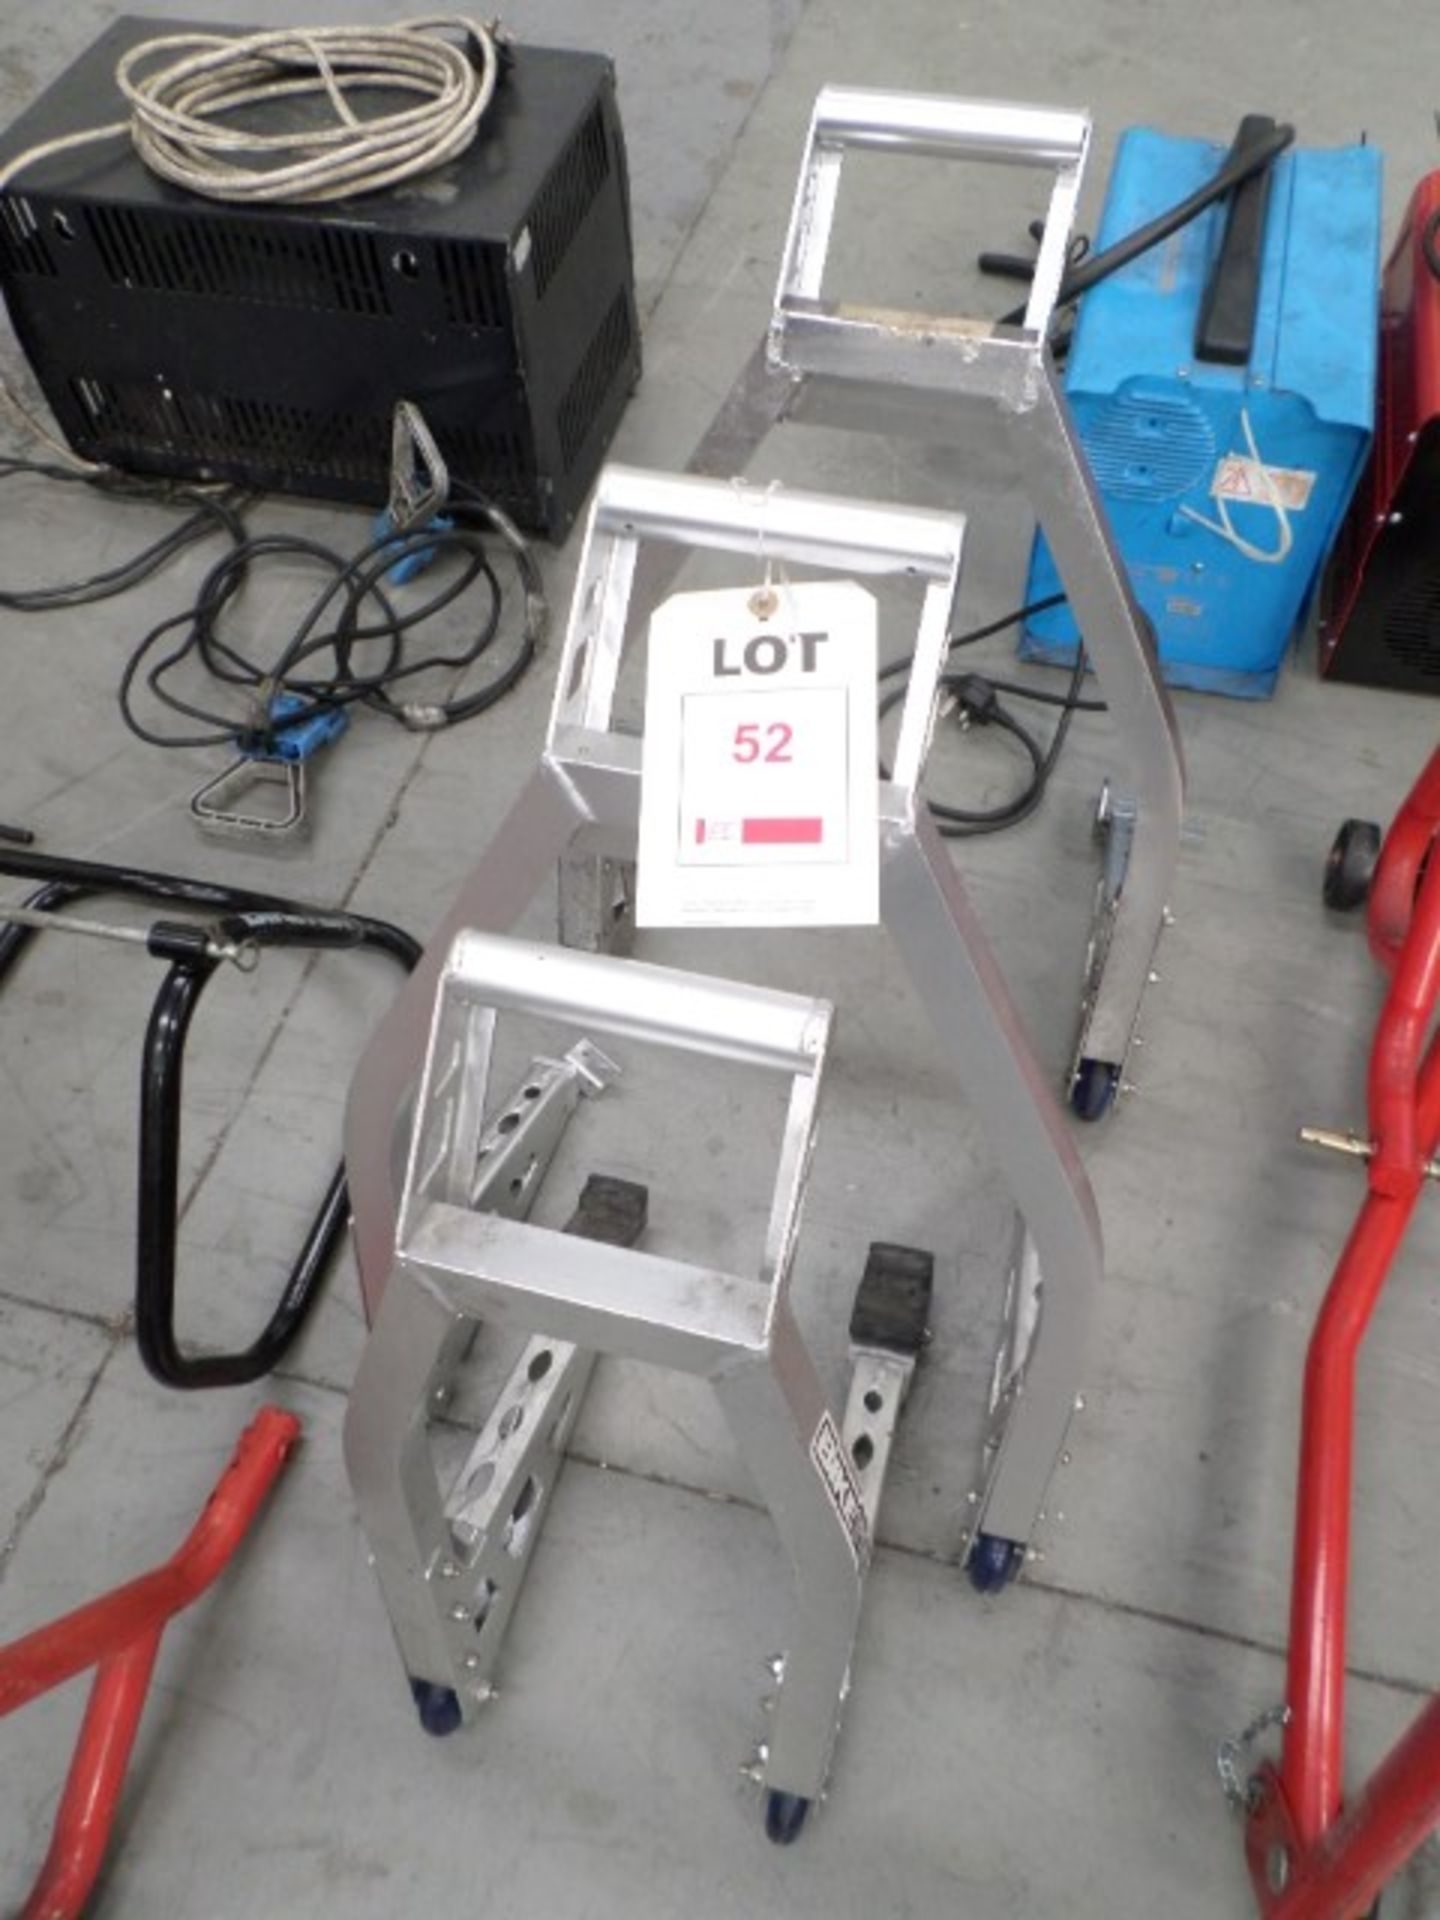 2 Bike Tech aluminium box section, motorcycle rear paddock stands and 1 front lift motorcycle stand